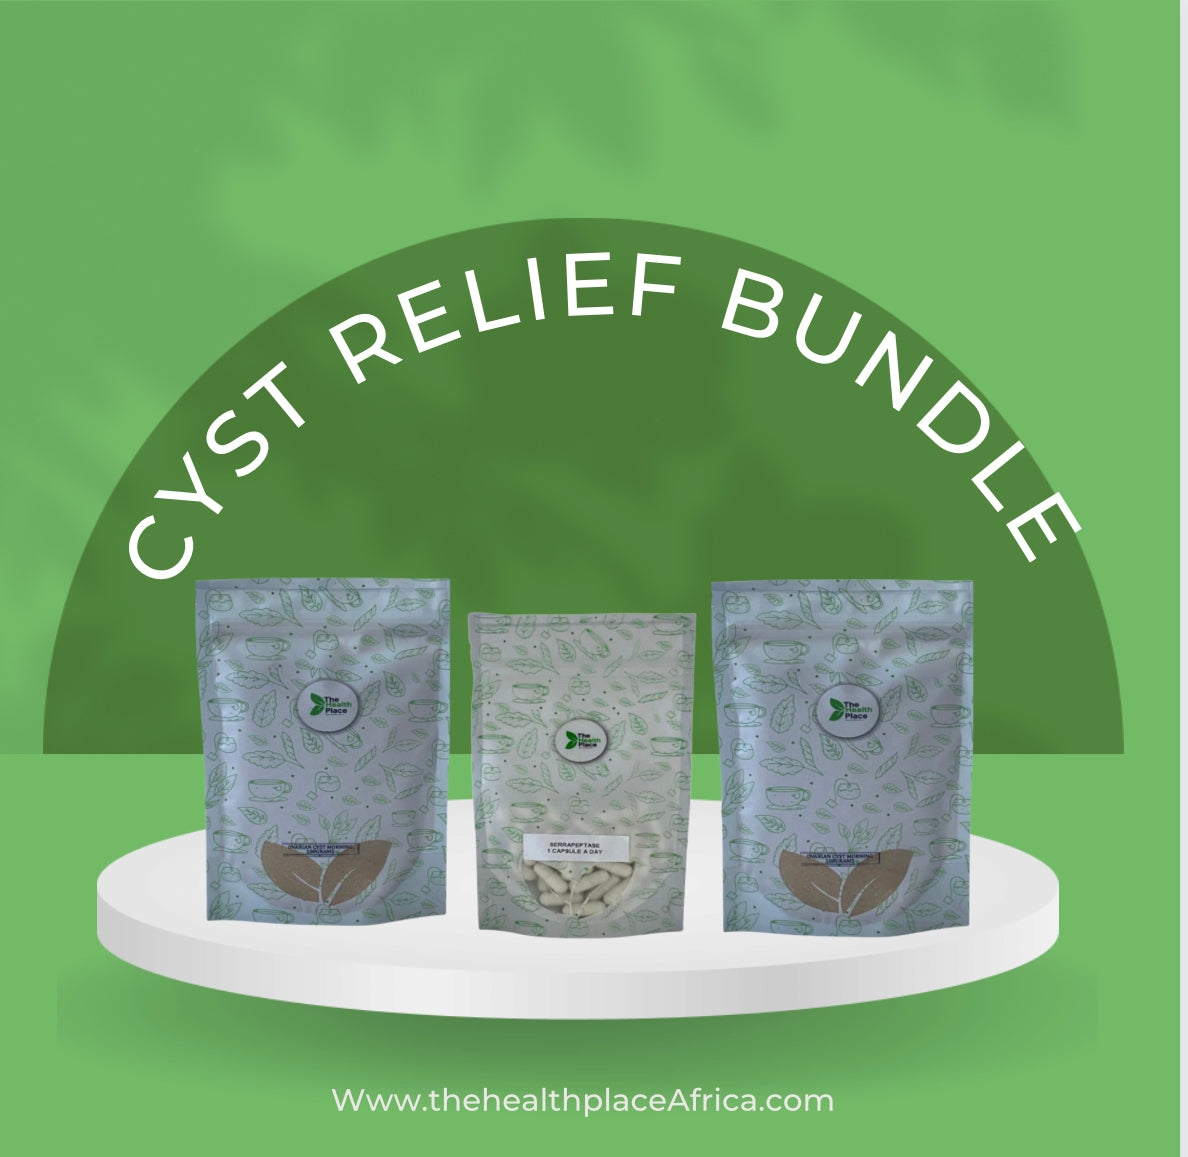 Cyst Relief Bundle (Ovarian Cyst)